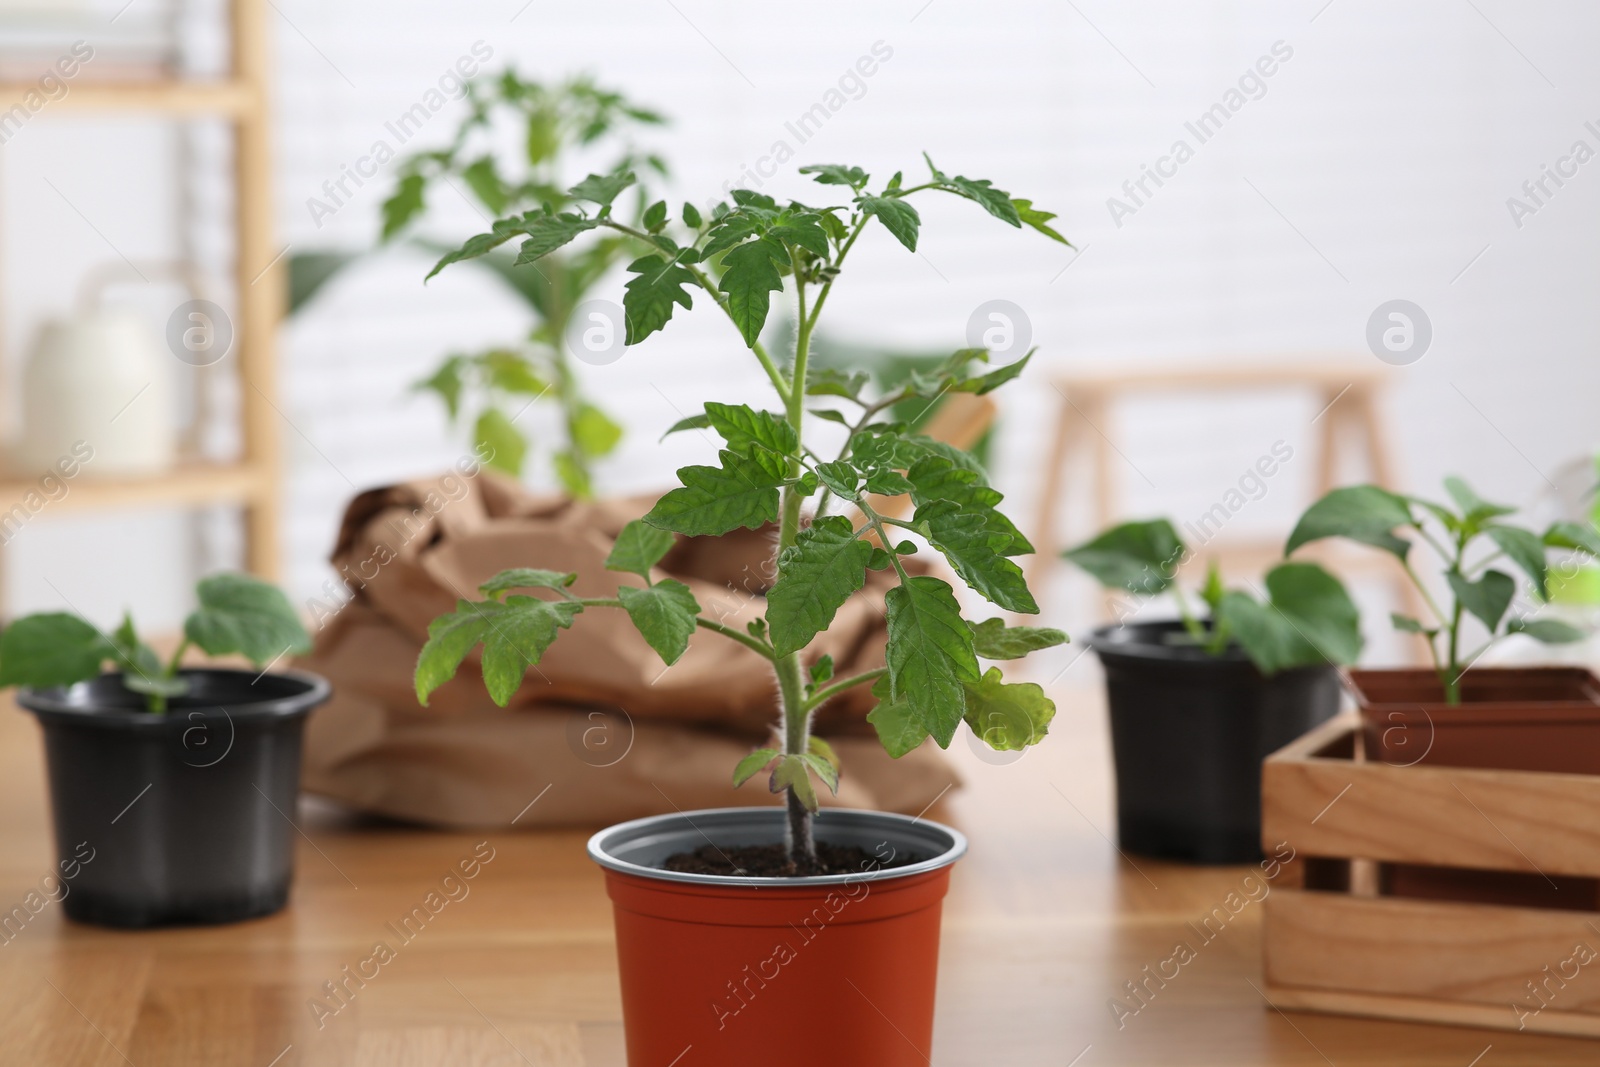 Photo of Seedling growing in pot with soil on wooden table indoors